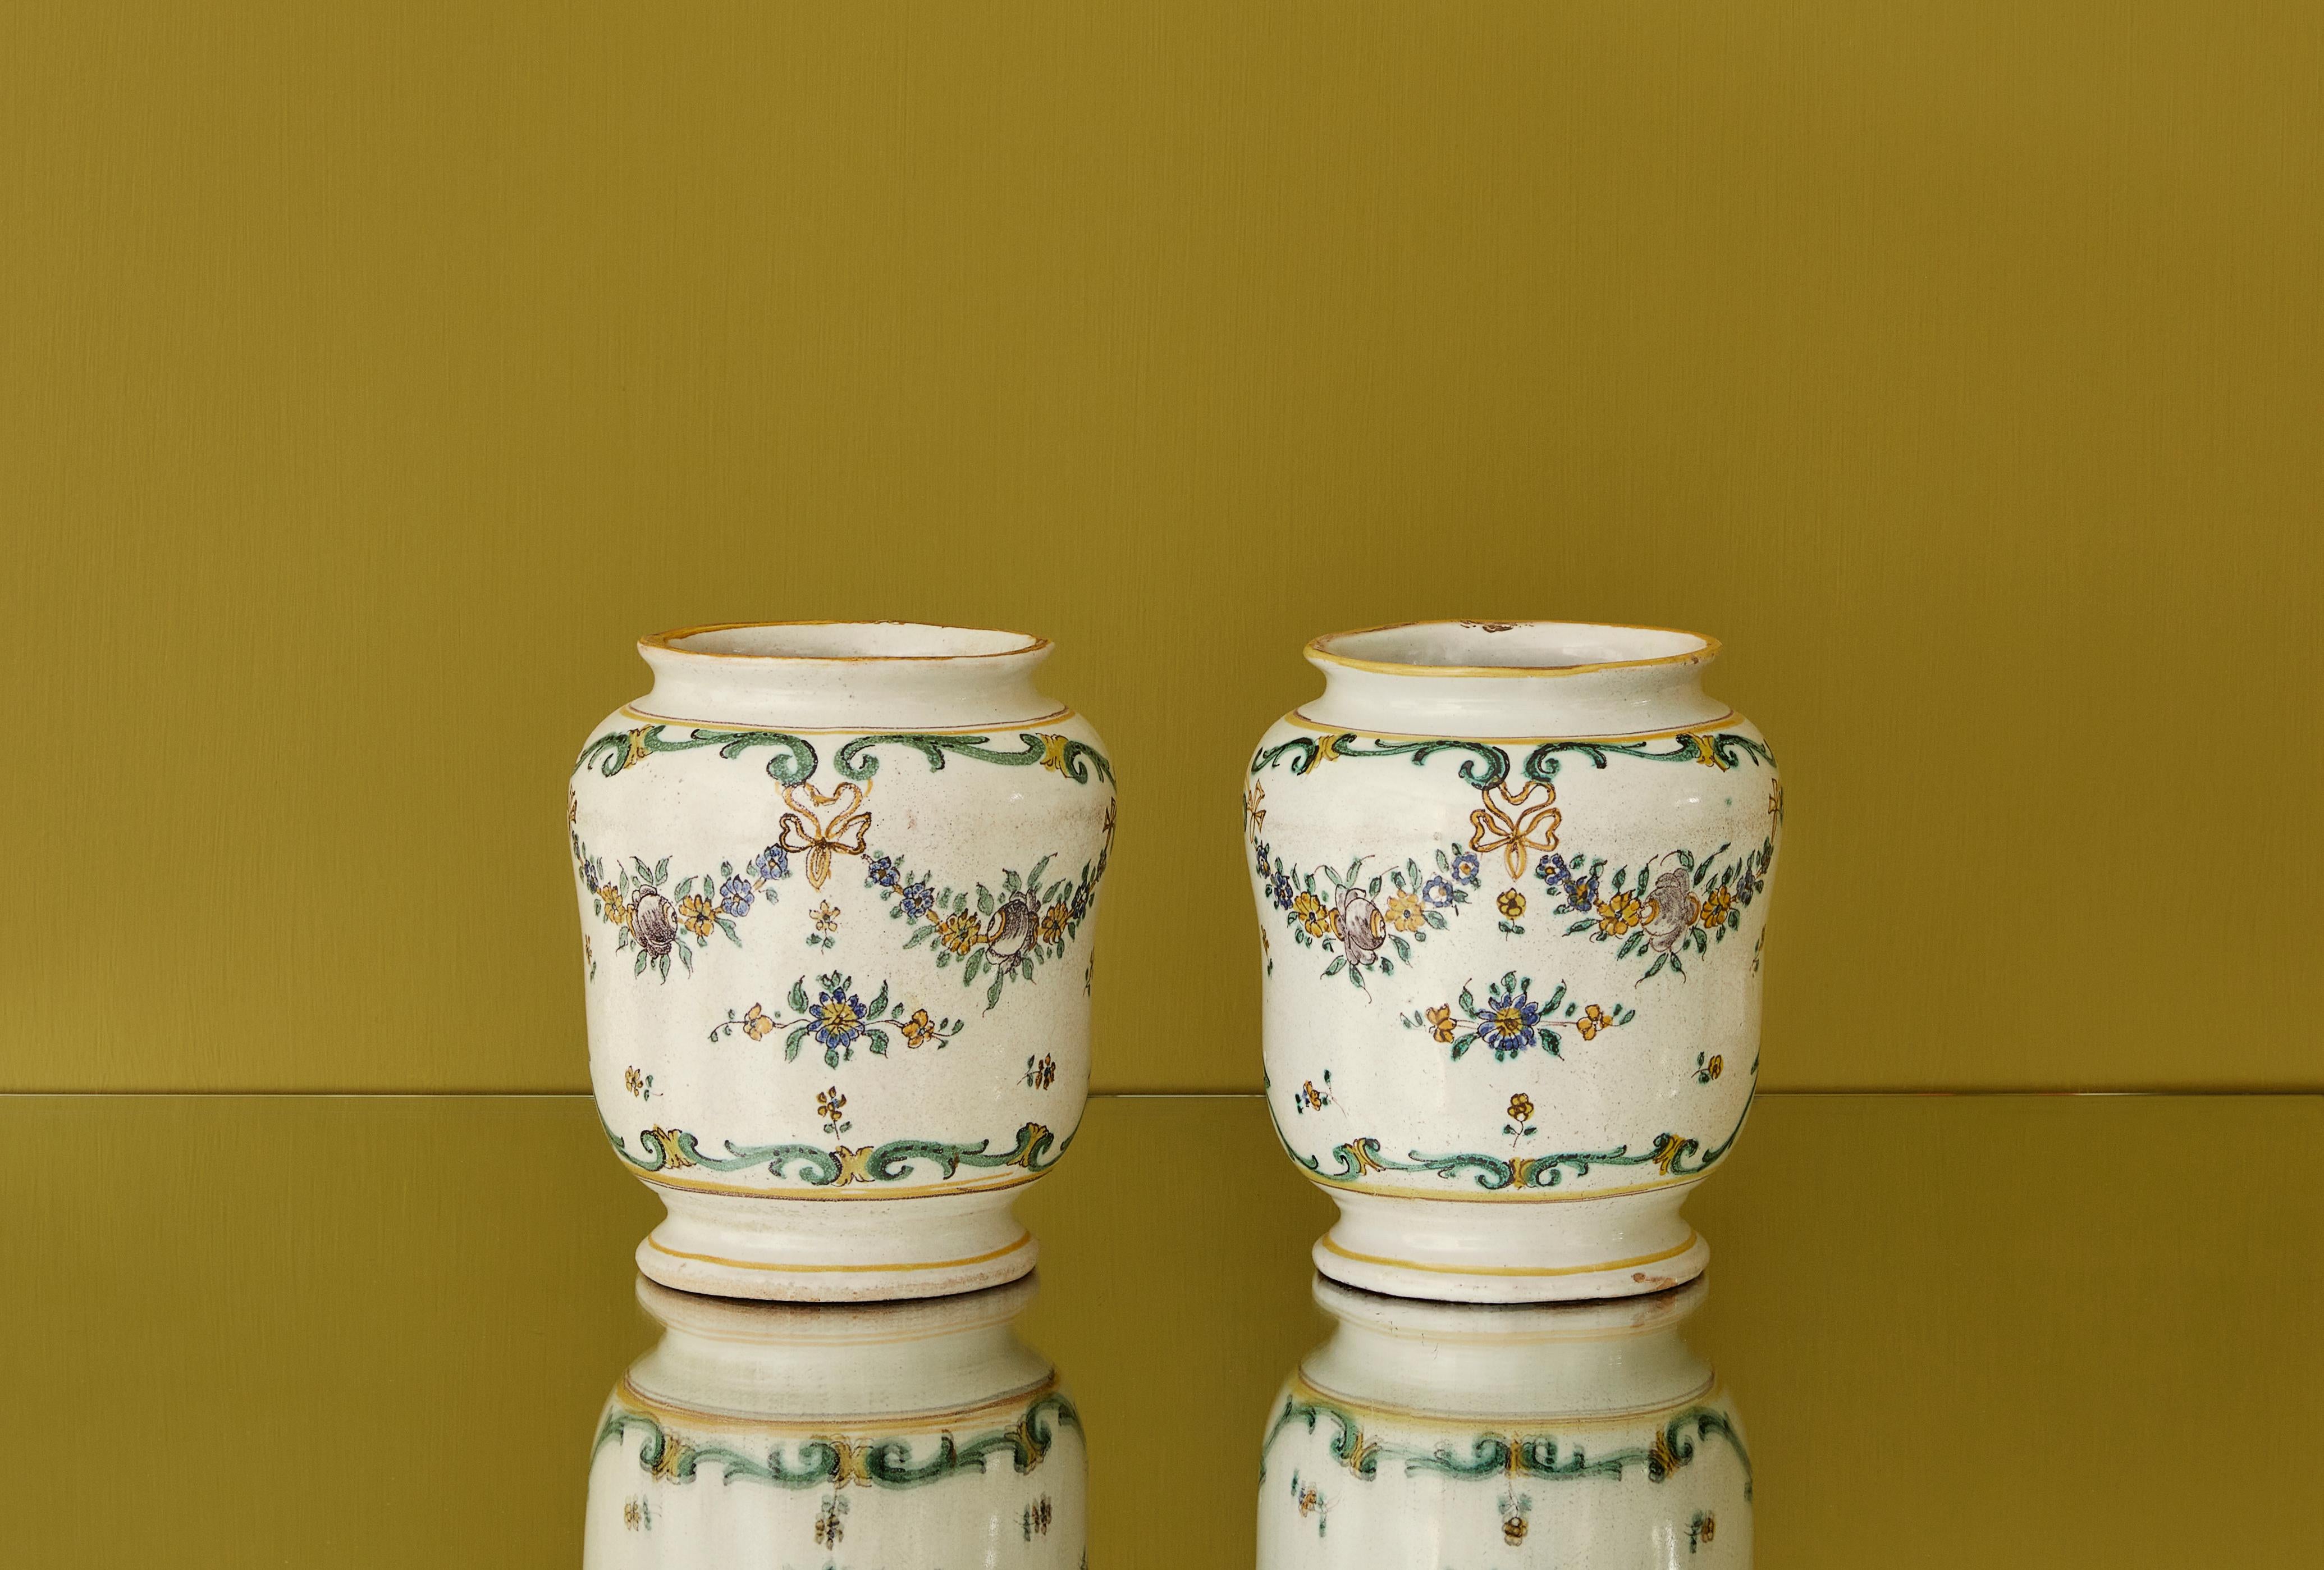 Italy, 19th century.

A pair of white ceramic vases with green and yellow flower decorations.

Measures: H 17.5 x Ø 14 cm.